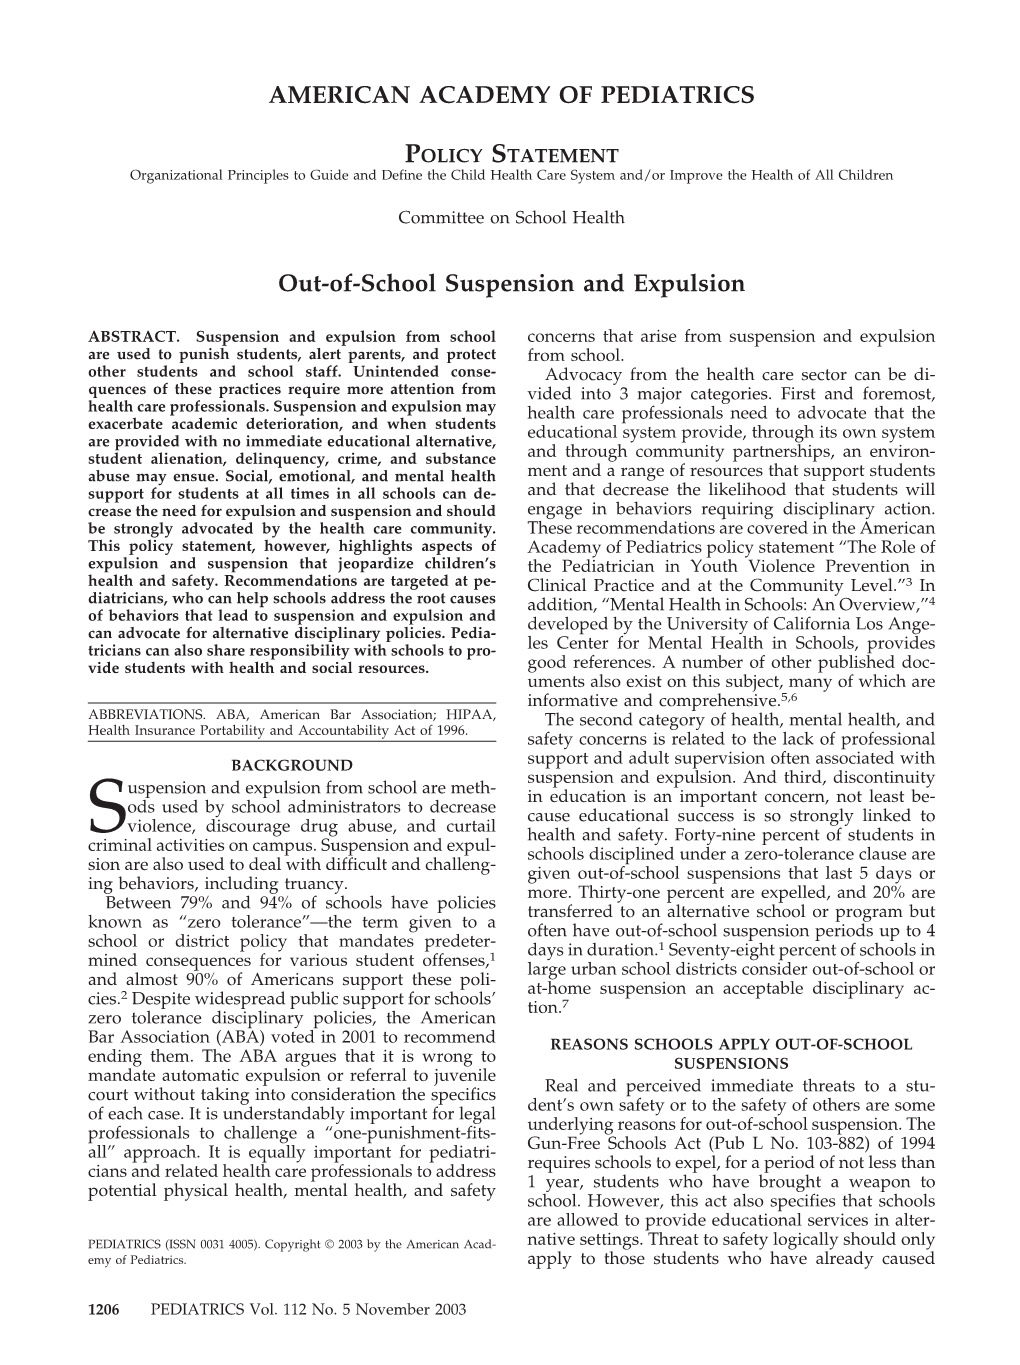 Out-Of-School Suspension and Expulsion